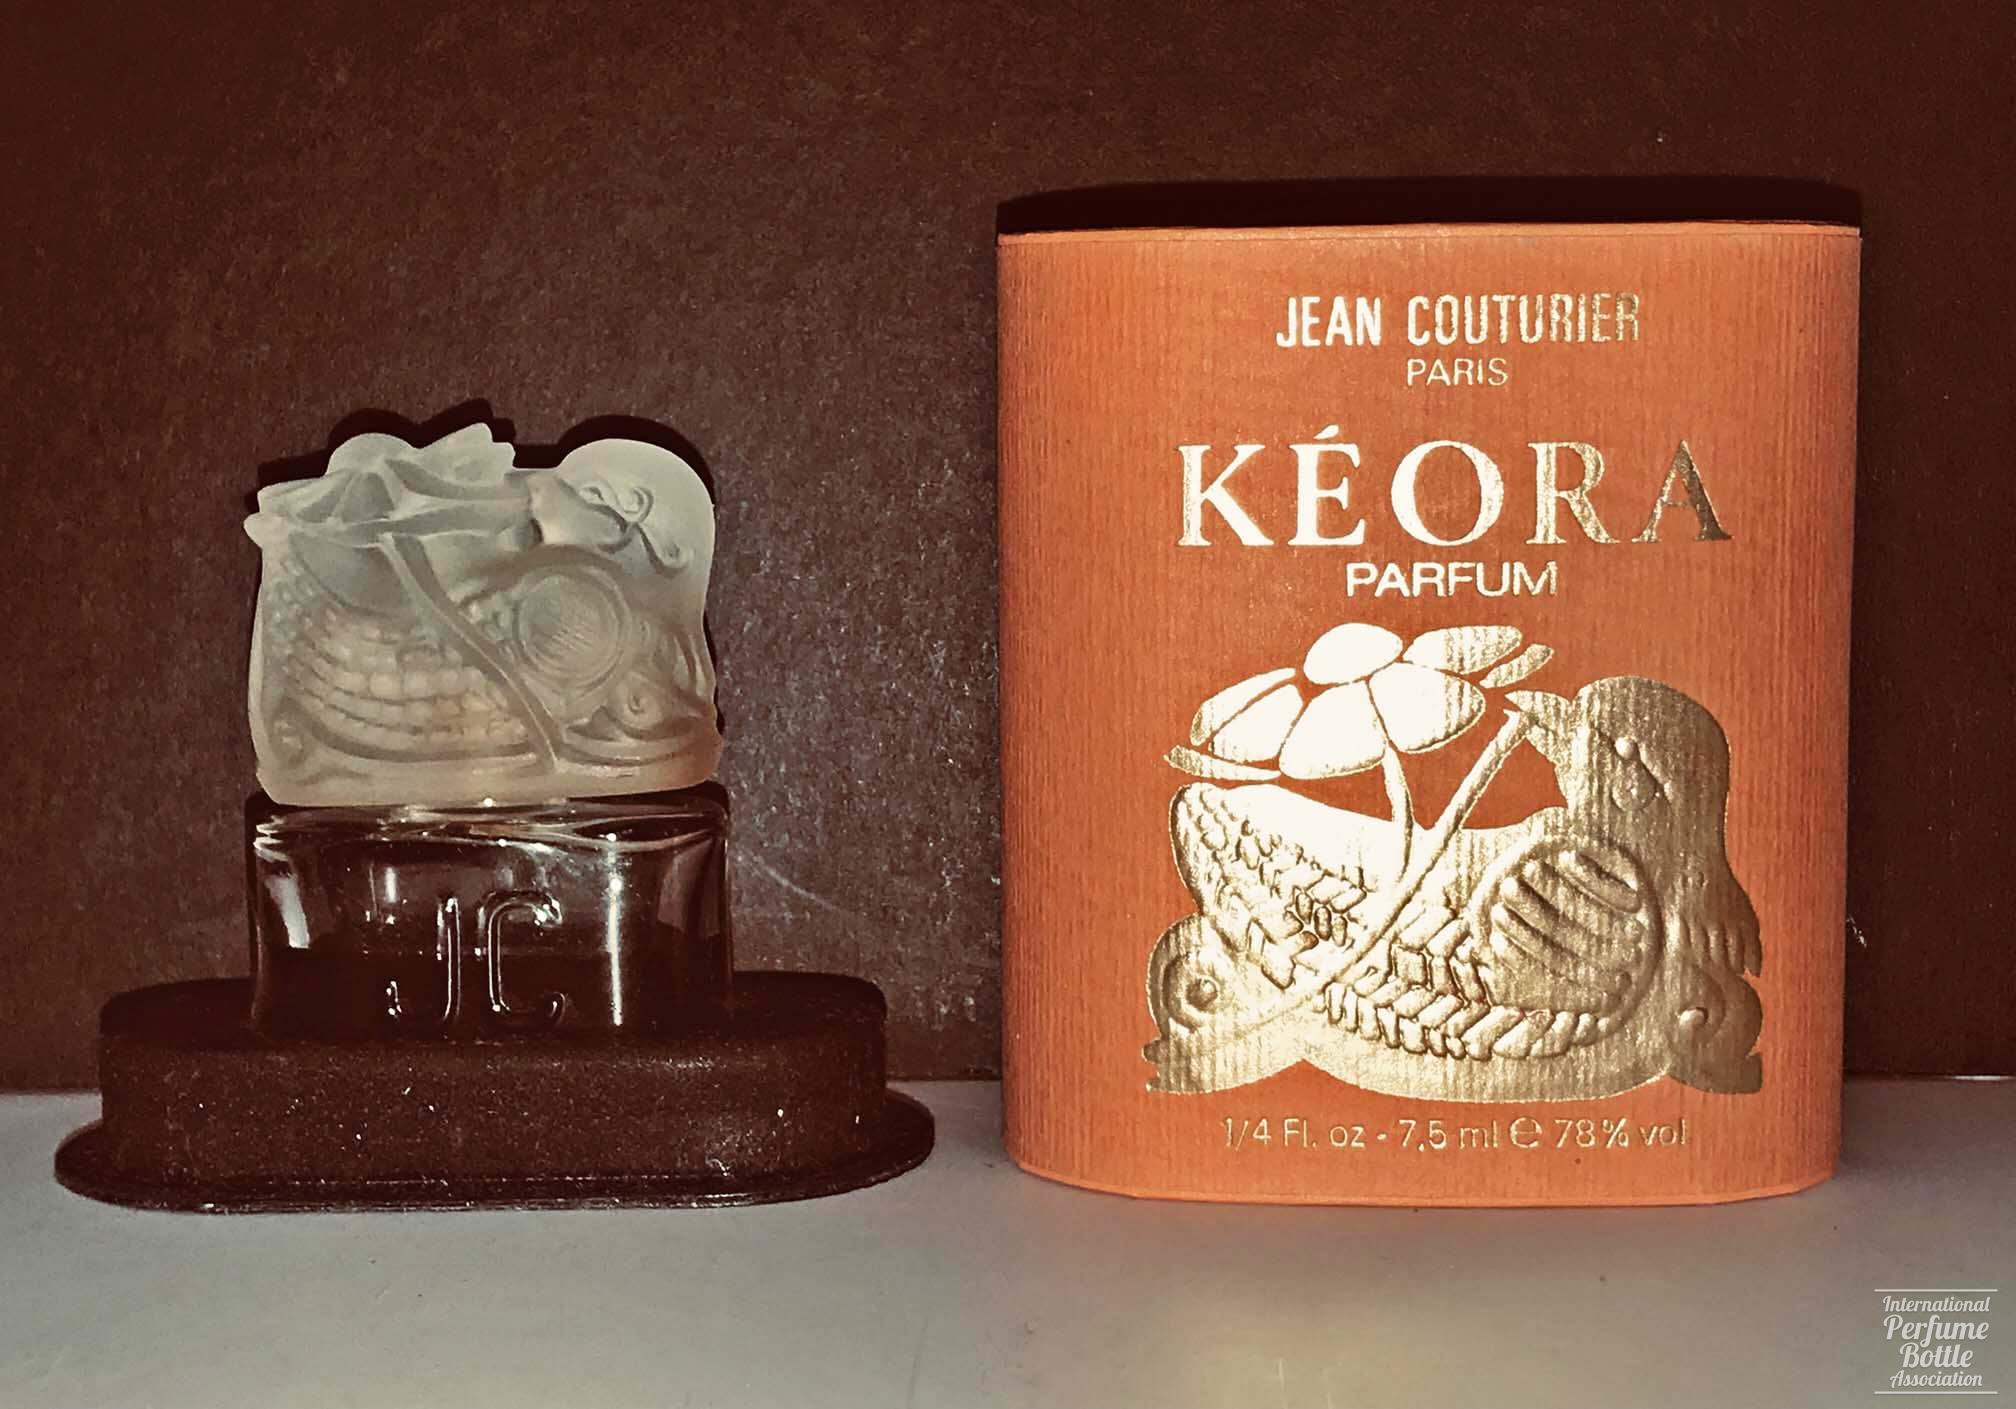 "Kéora" by Jean Couturier